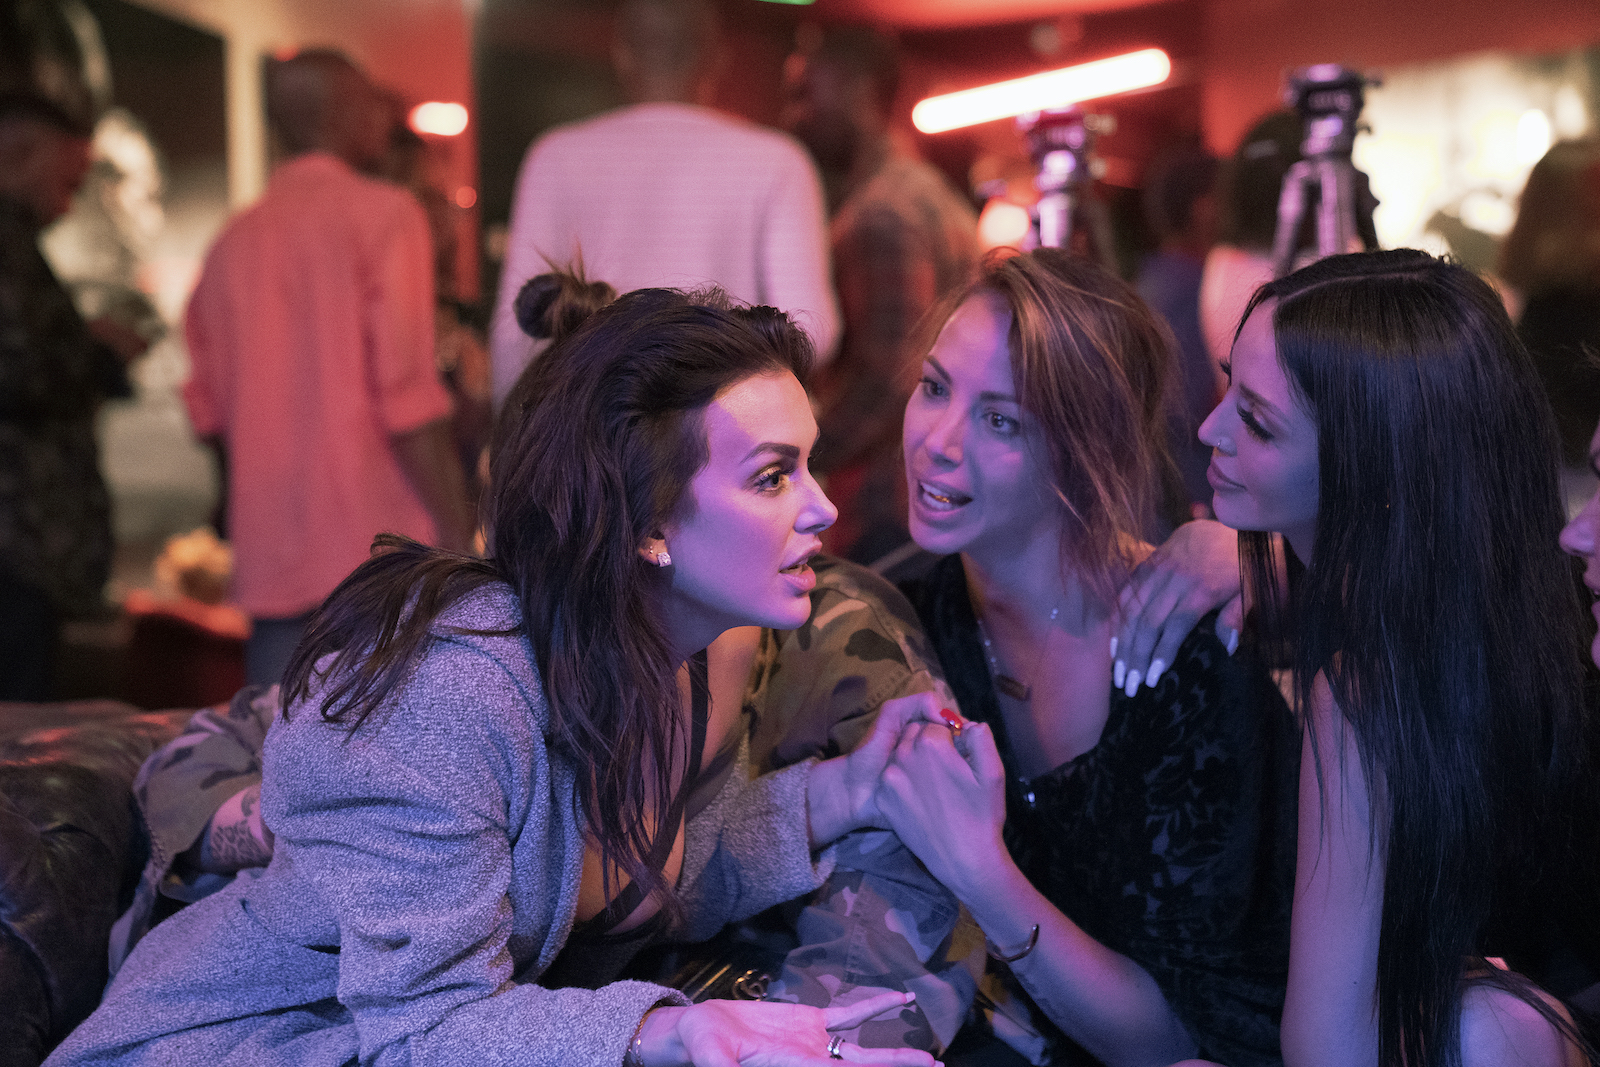 Lala Kent, Kristen Doute, and Scheana Shay from Vanderpump Rules have a discussion at a party